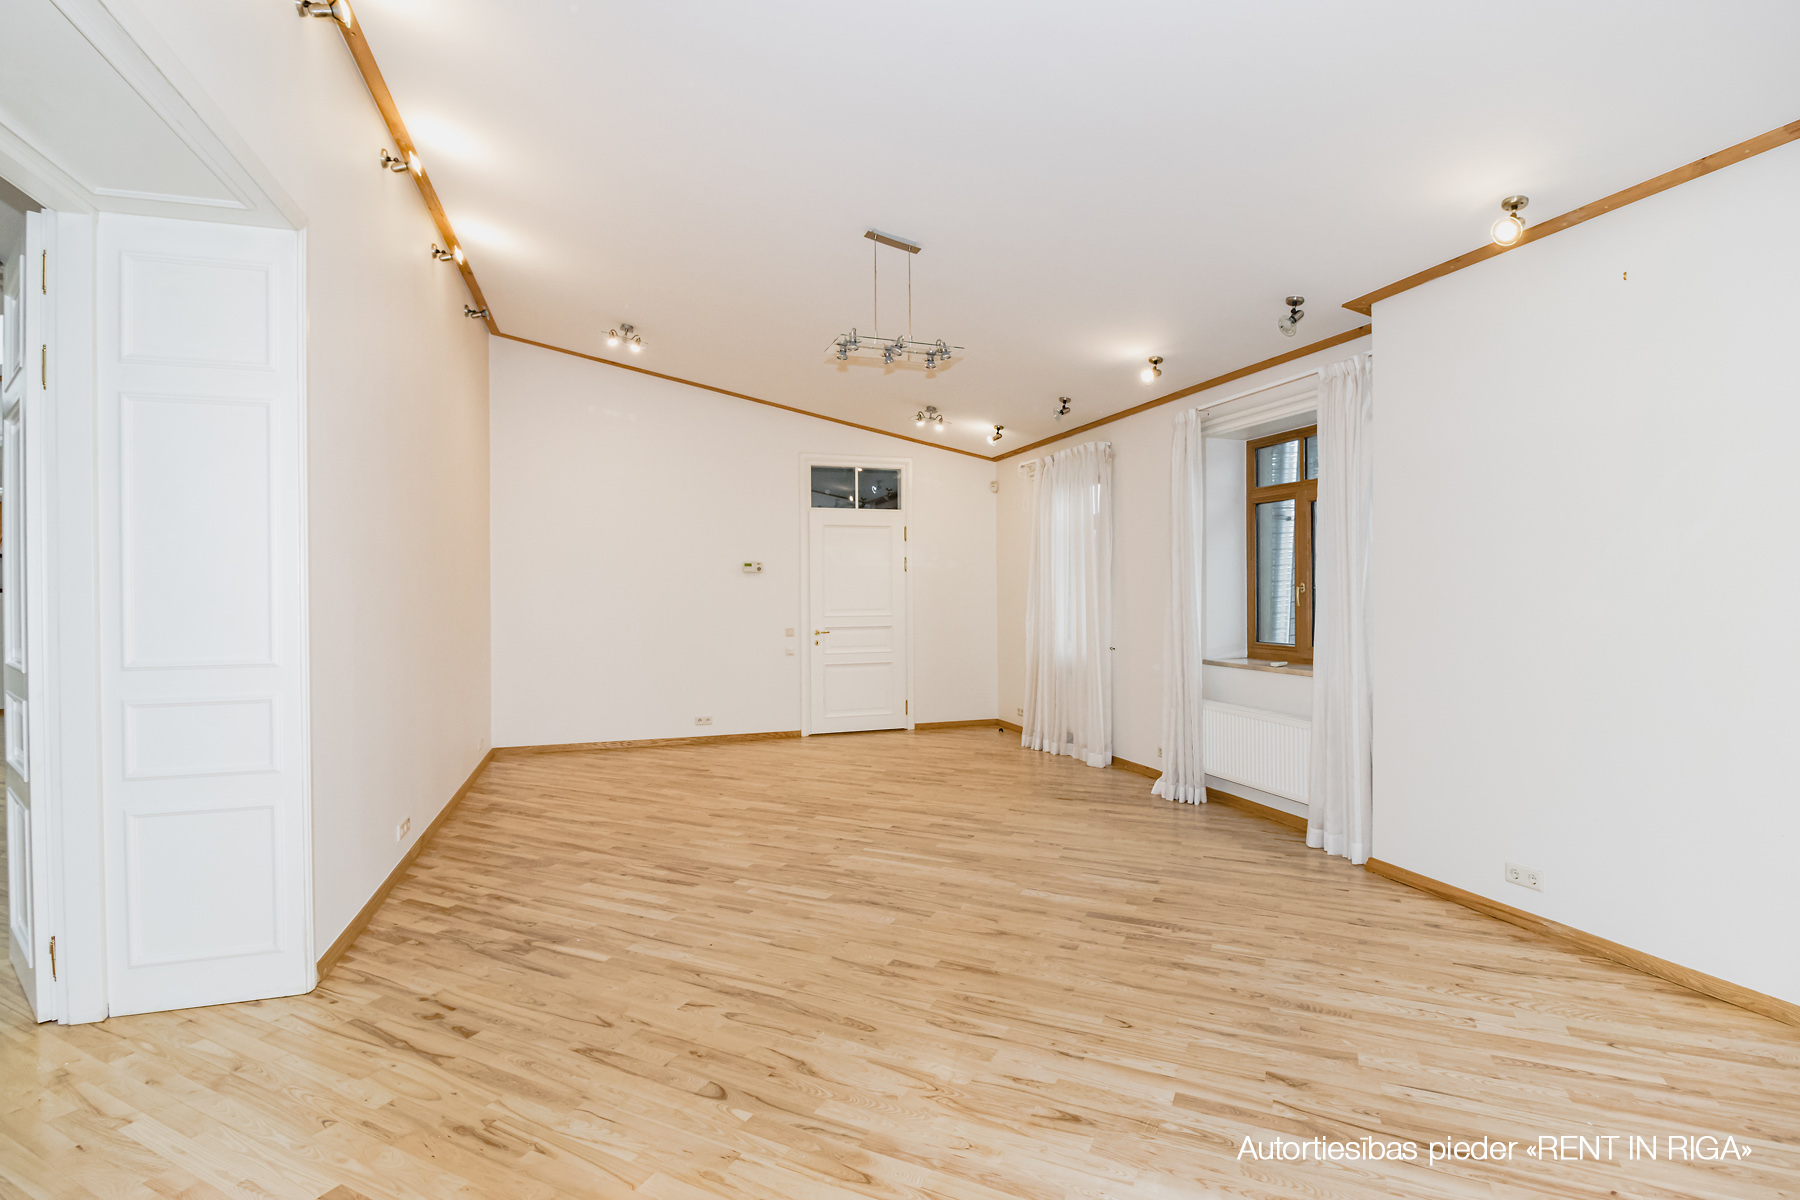 Apartment for rent, Jēkaba street 20/22 - Image 1